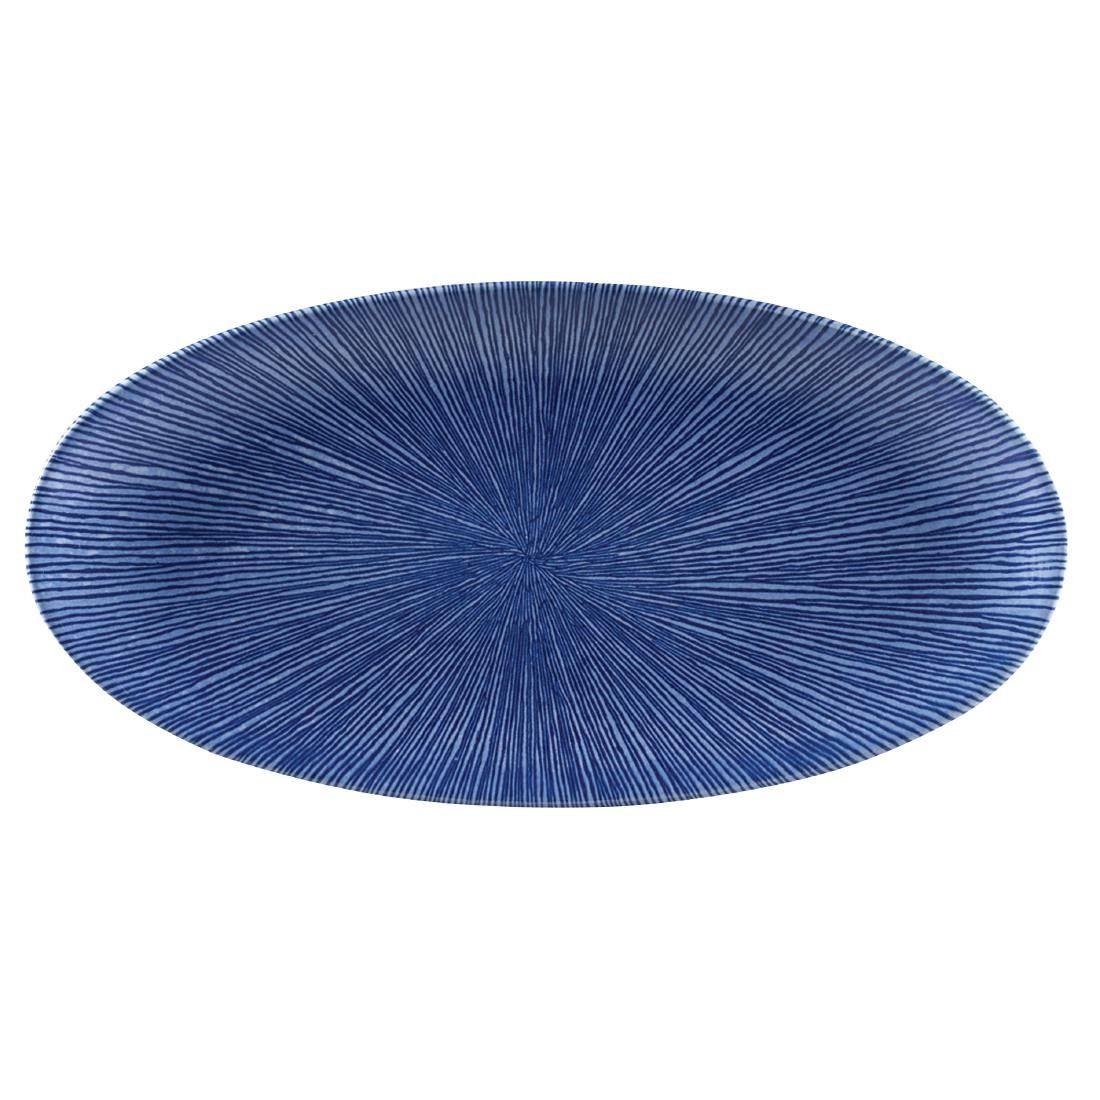 FC112 Churchill Studio Prints Agano Oval Chefs Plates Blue 347 x 173mm (Pack of 6) JD Catering Equipment Solutions Ltd